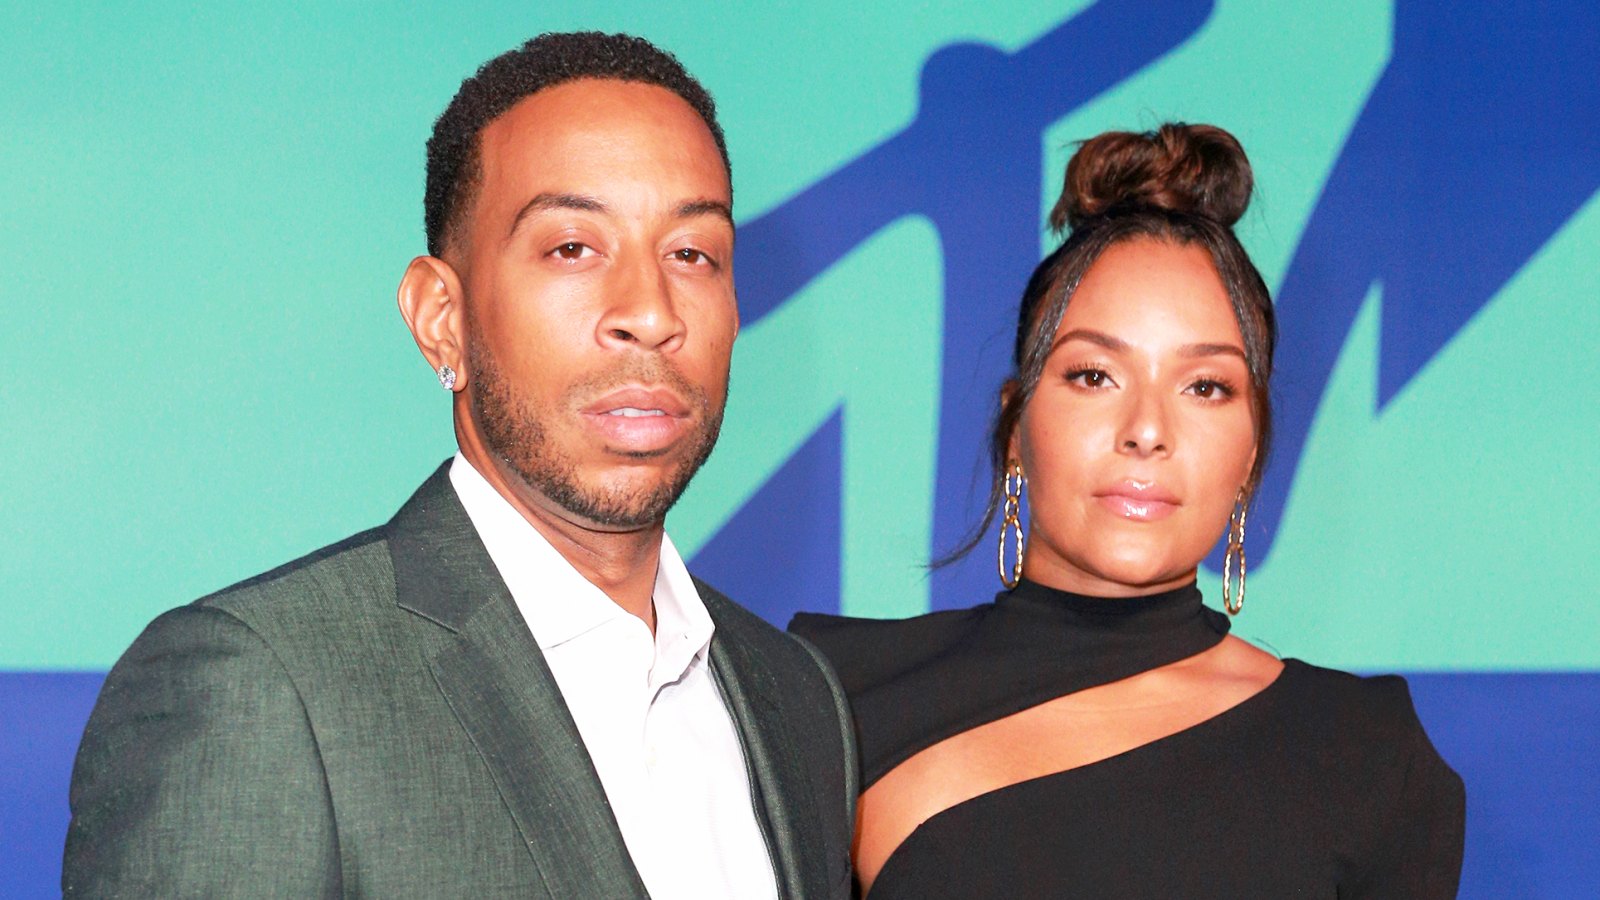 Ludacris and Eudoxie Mbouguiengue attend the 2017 MTV Video Music Awards at The Forum in Inglewood, California.